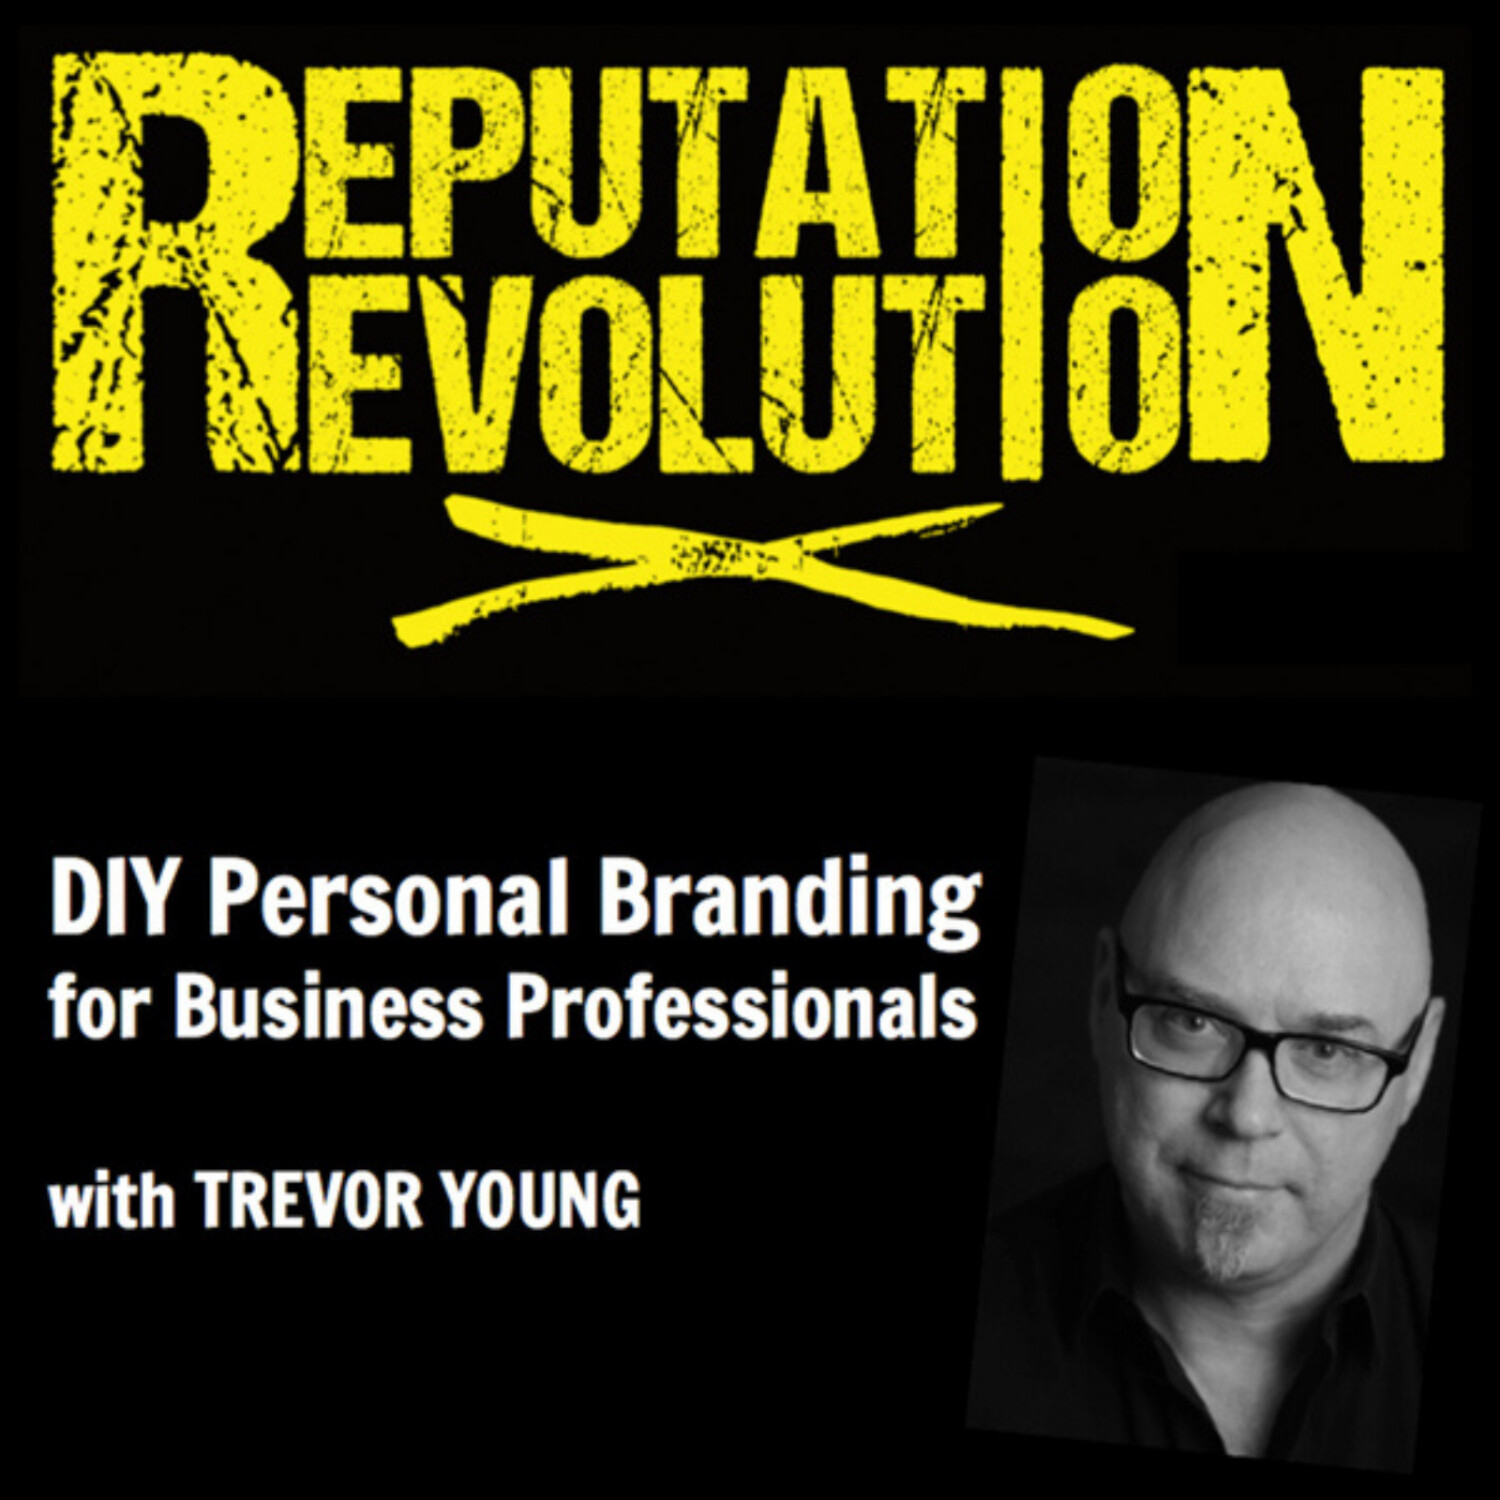 022 Why aspiring thought leaders should consider writing and publishing their own book, with Trevor Young